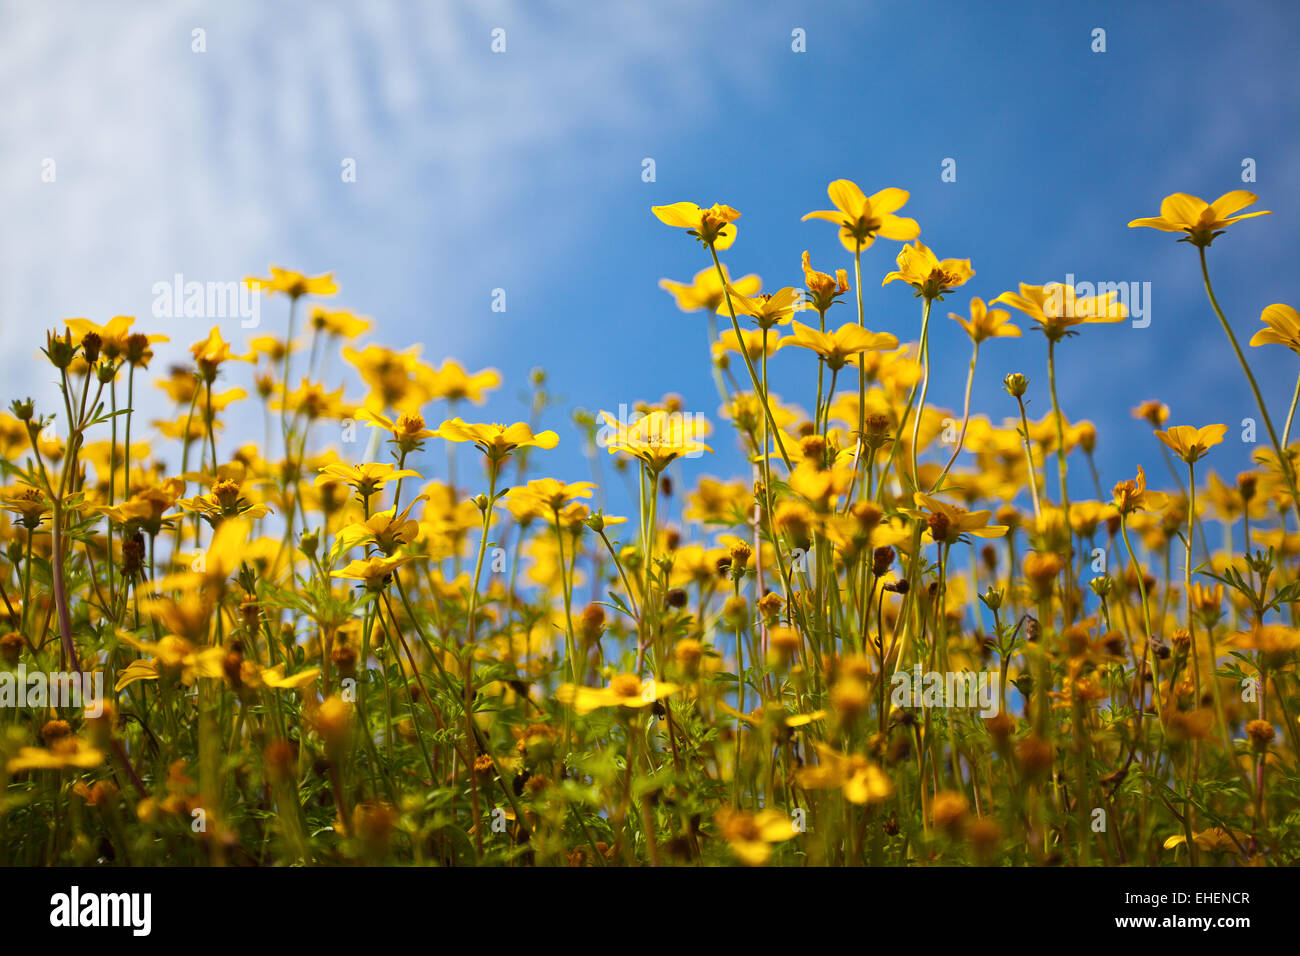 Flowers on Summer Meadow Stock Photo